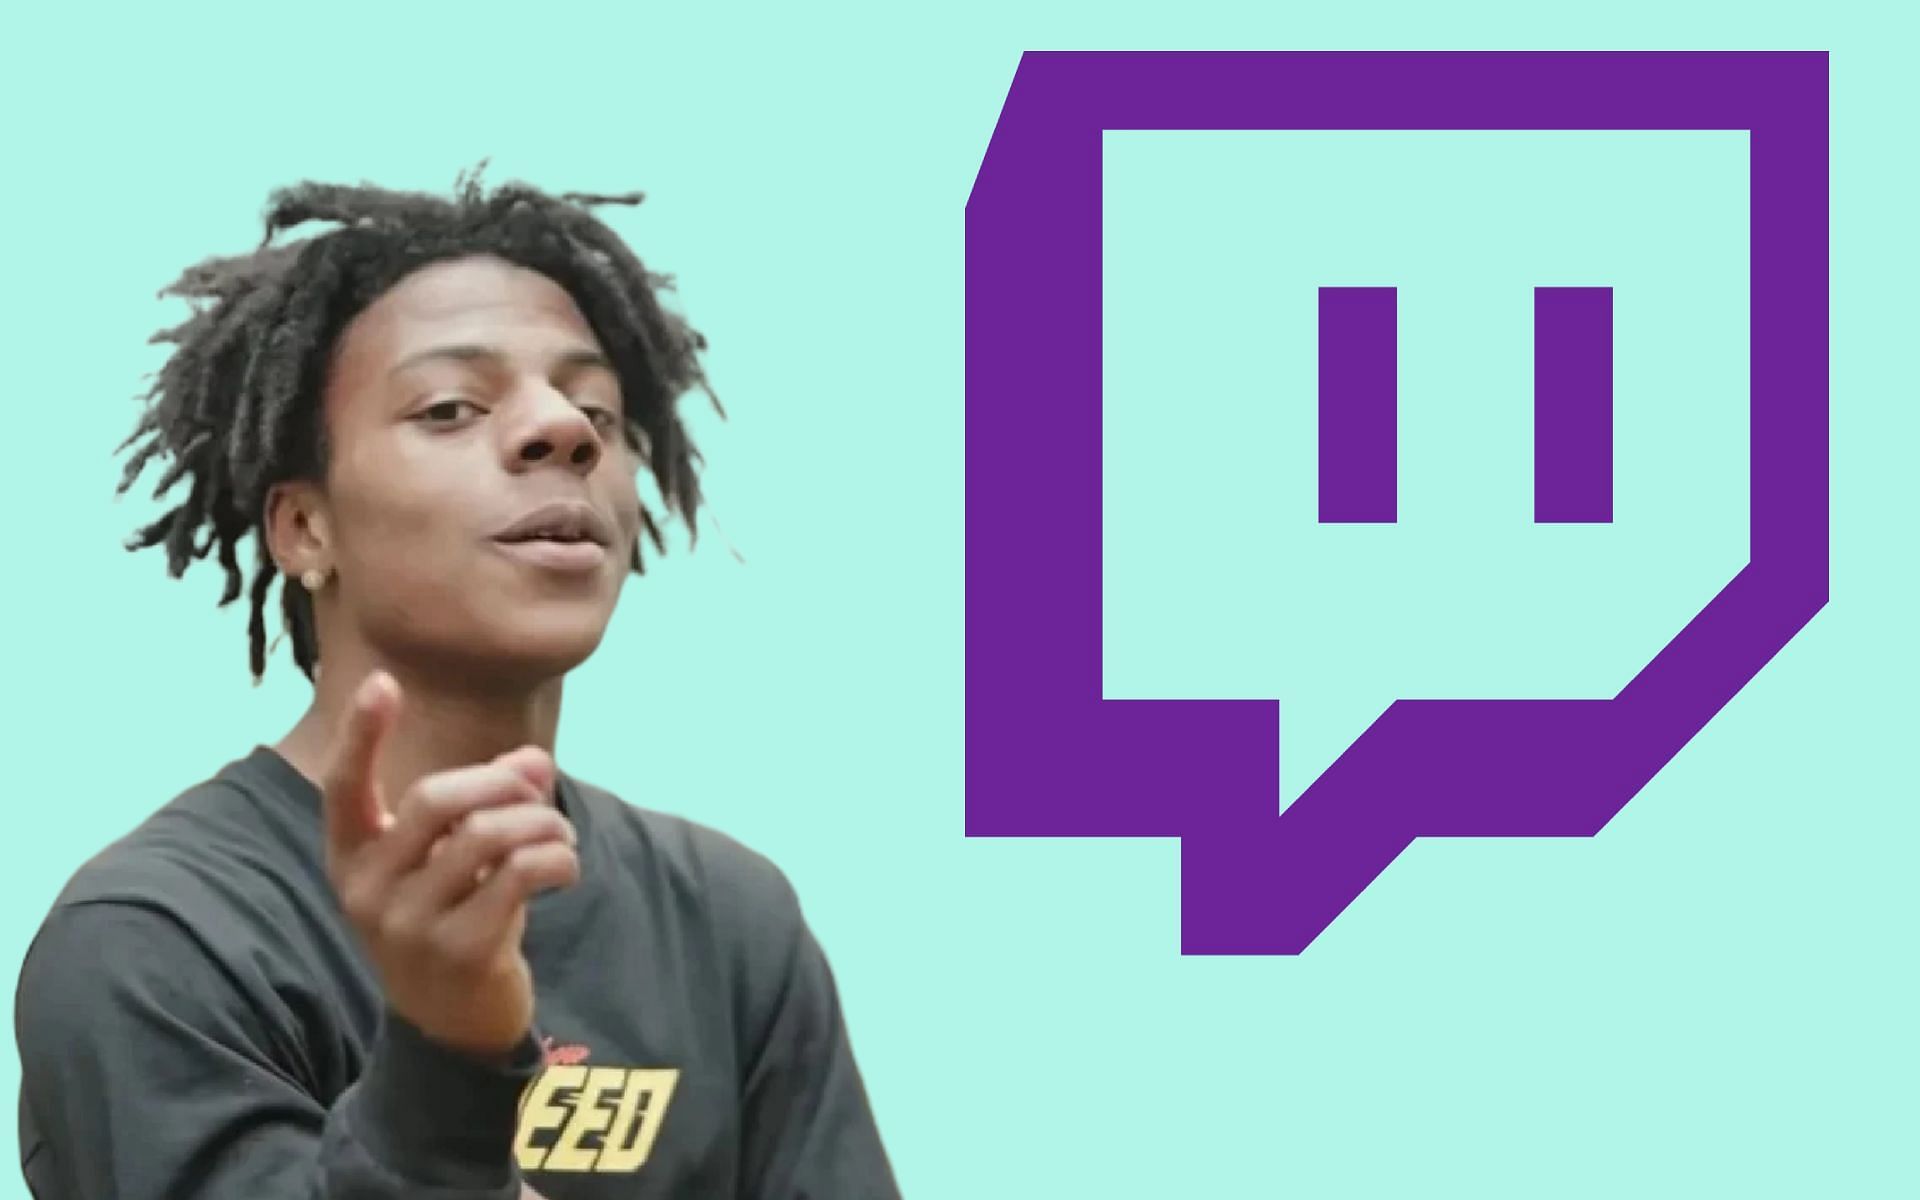 Why was IShowSpeed indefinitely banned from Twitch? Revisiting the